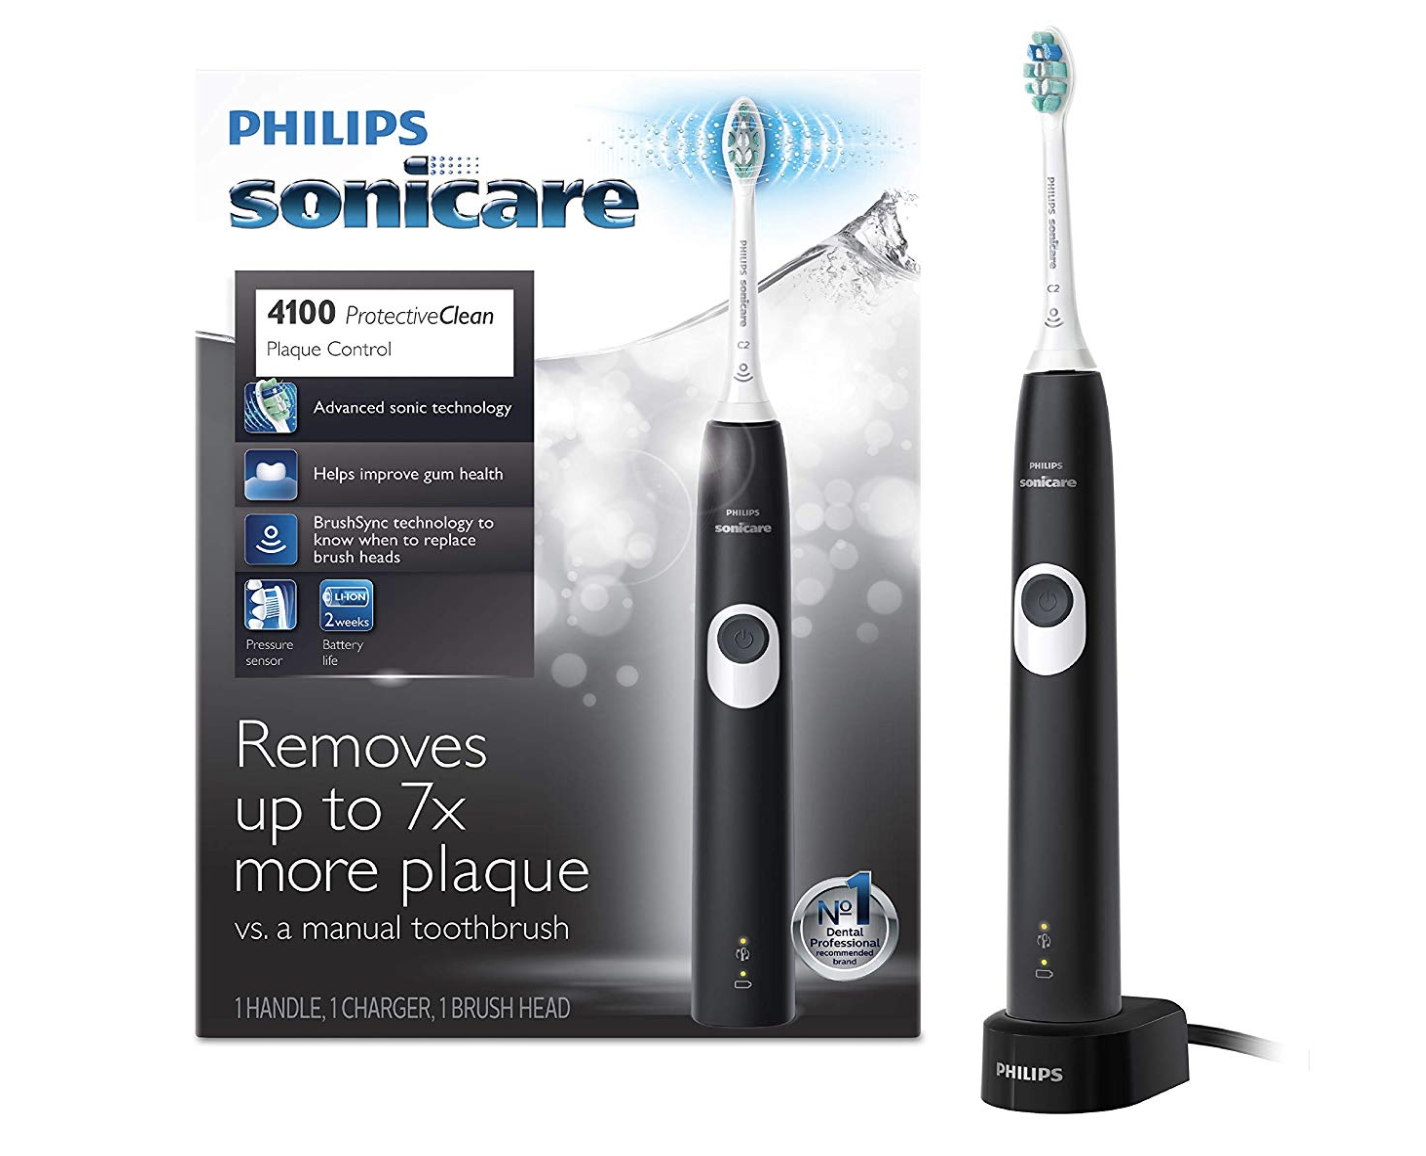 Philips Sonicare ProtectiveClean 4100 Electric Rechargeable Toothbrush - ($39.50 Down From $69.99)